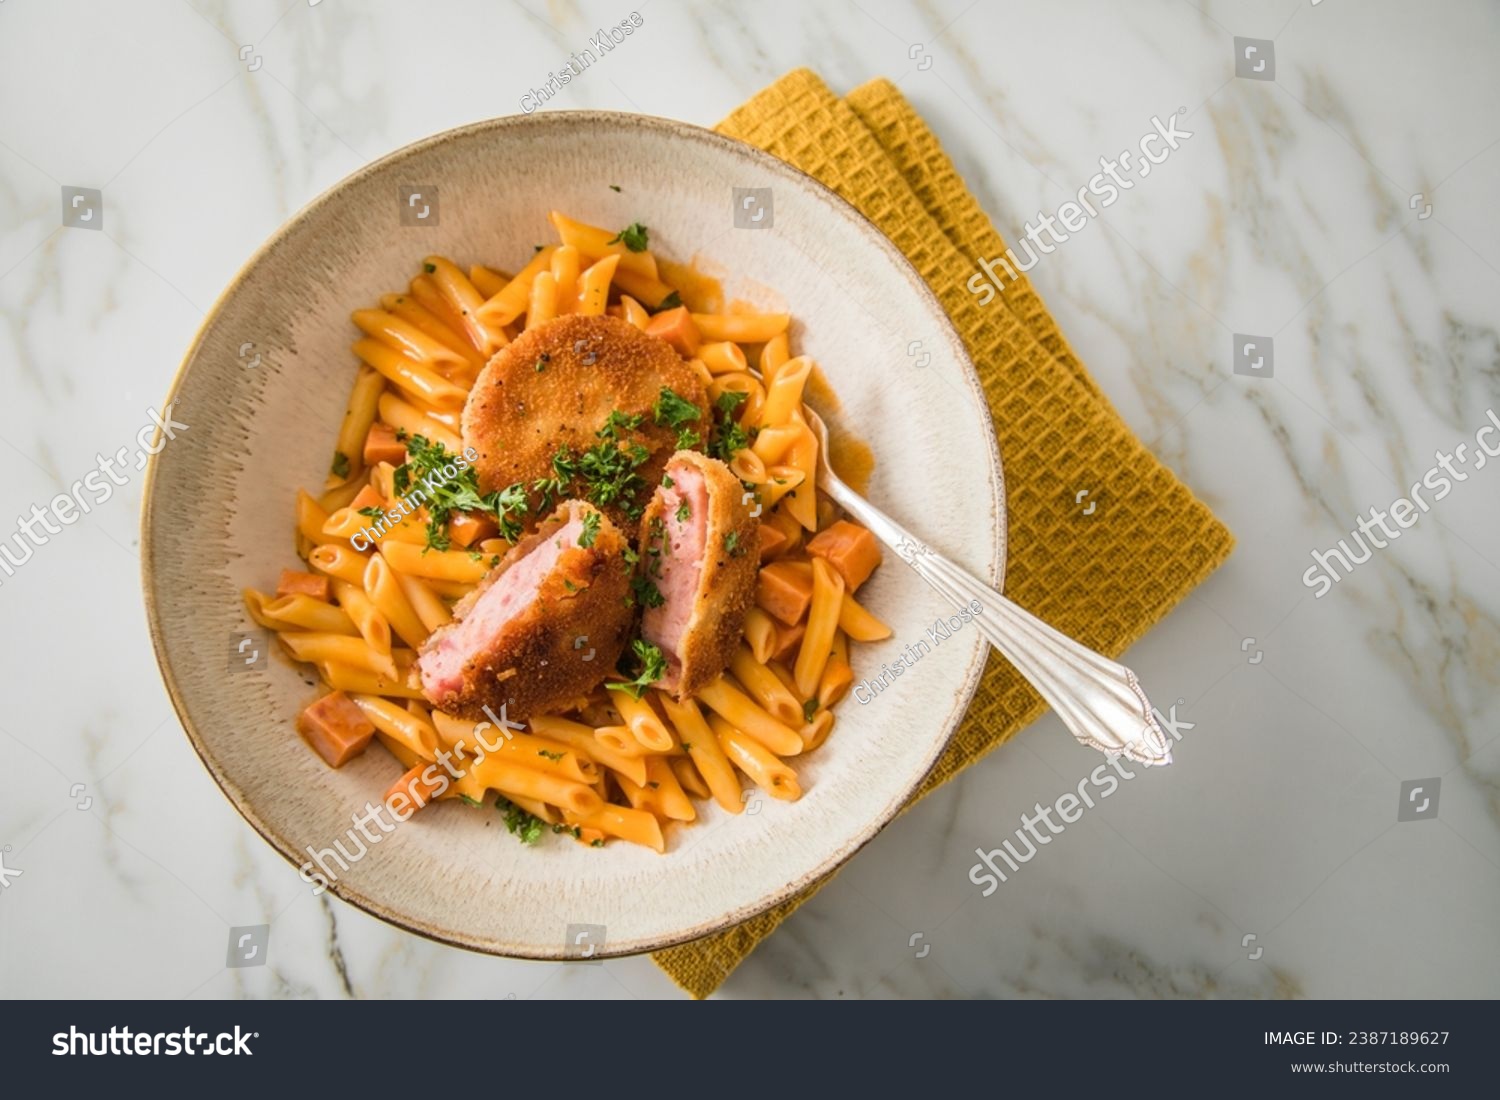 Jägerschnitzel escalope chasseur a East German DDR GDR specialty of breaded fried sausage slice, tomato sauce, Macaroni Penne pasta, parsley in bowl, cutlery, napkin, marble background #2387189627